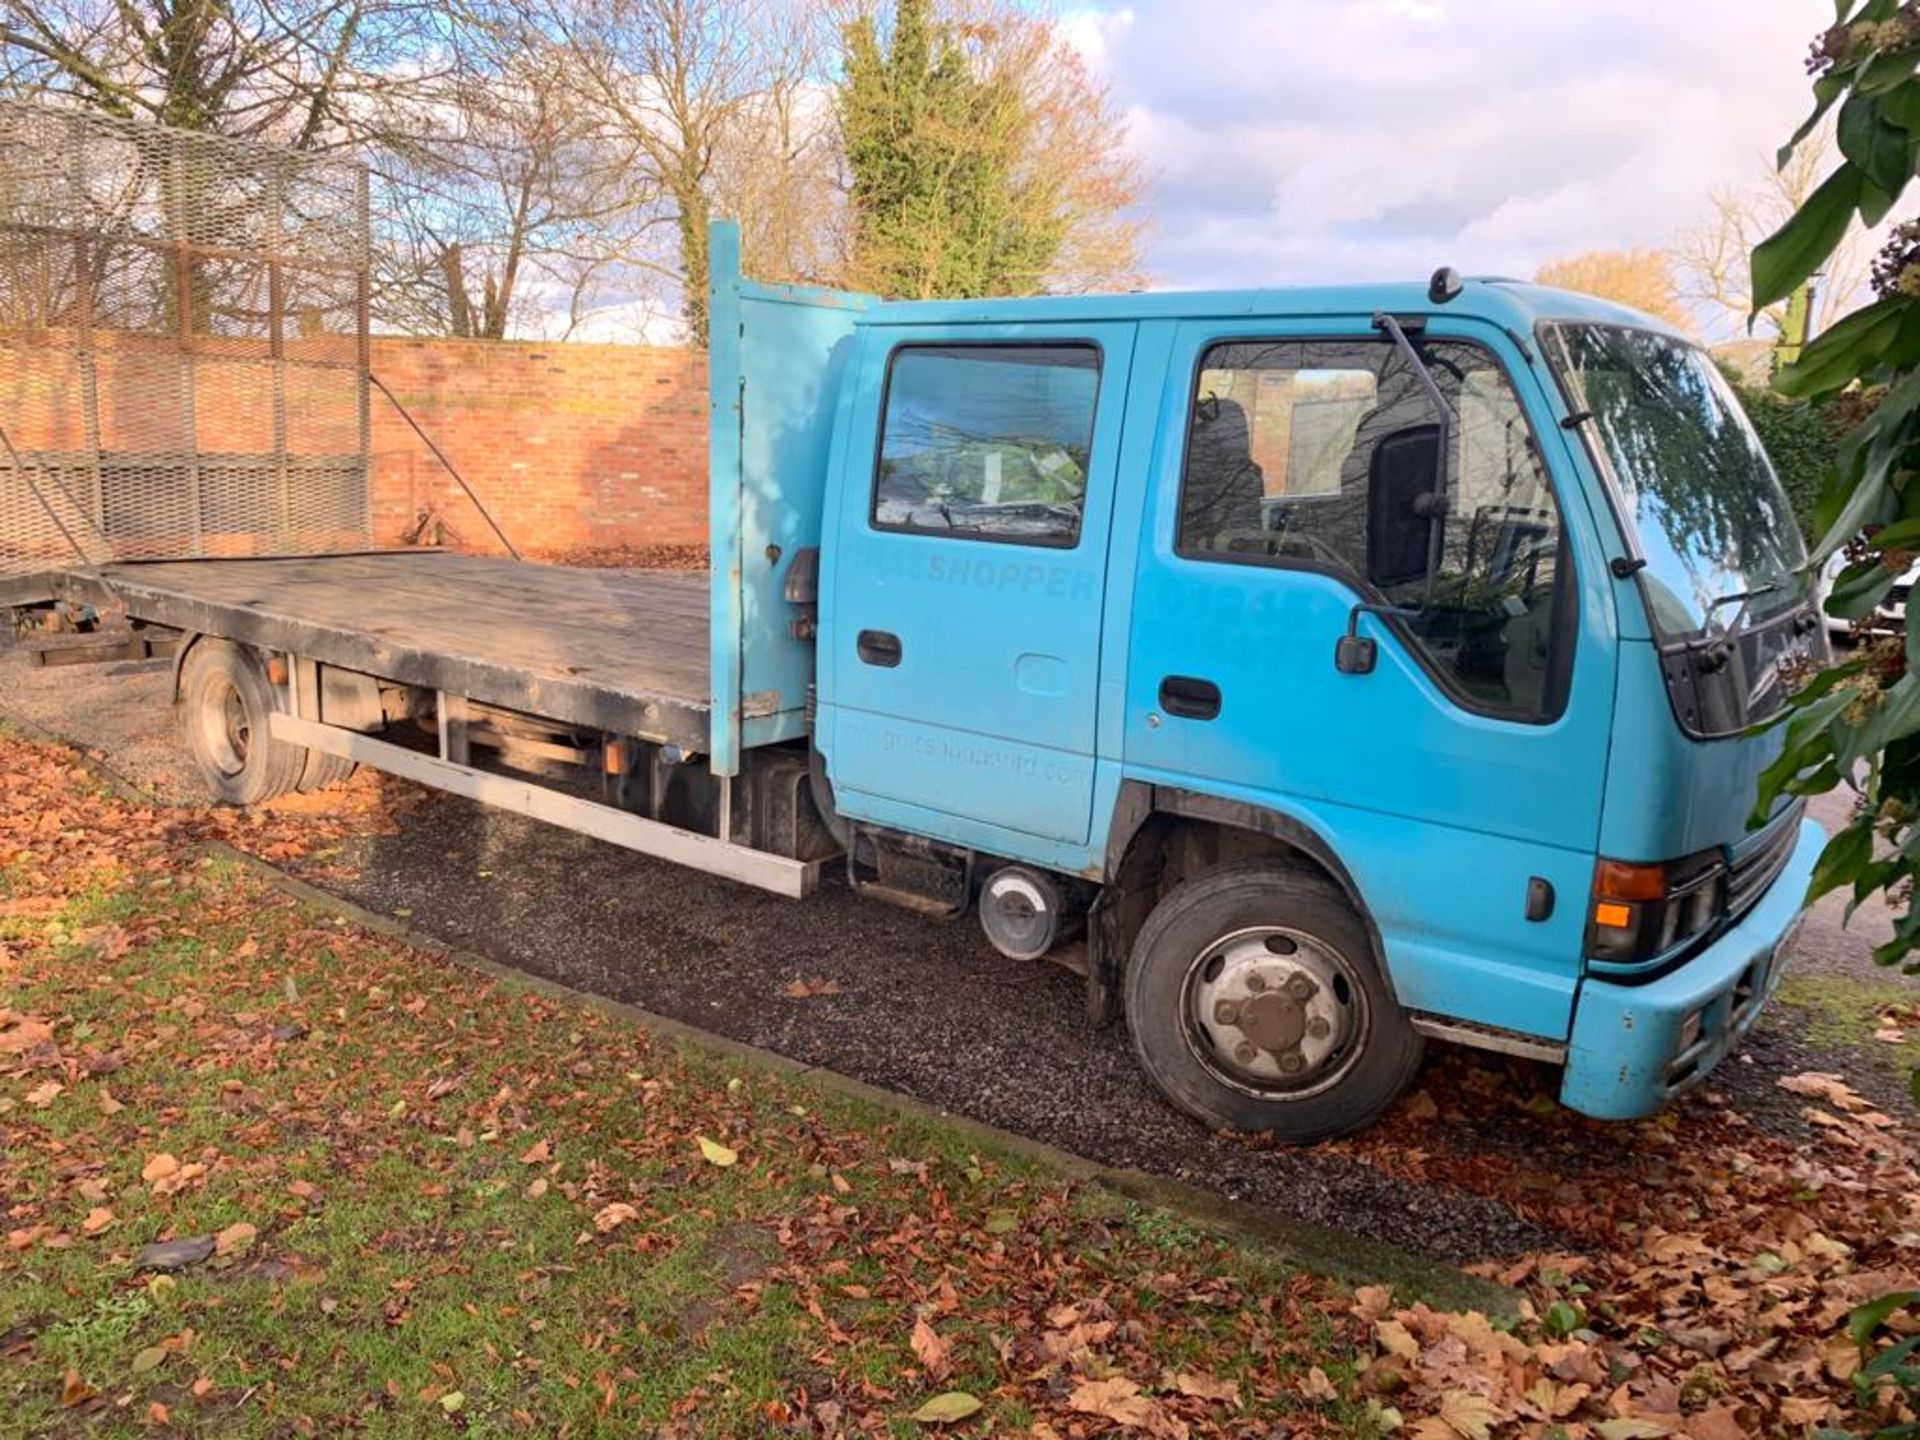 2004/53 REG ISUZU NQR 70 7.5 TON BEAVERTAIL DOUBLE CAB BLUE RECOVERY LORRY, SHOWING 2 FORMER KEEPERS - Image 2 of 11